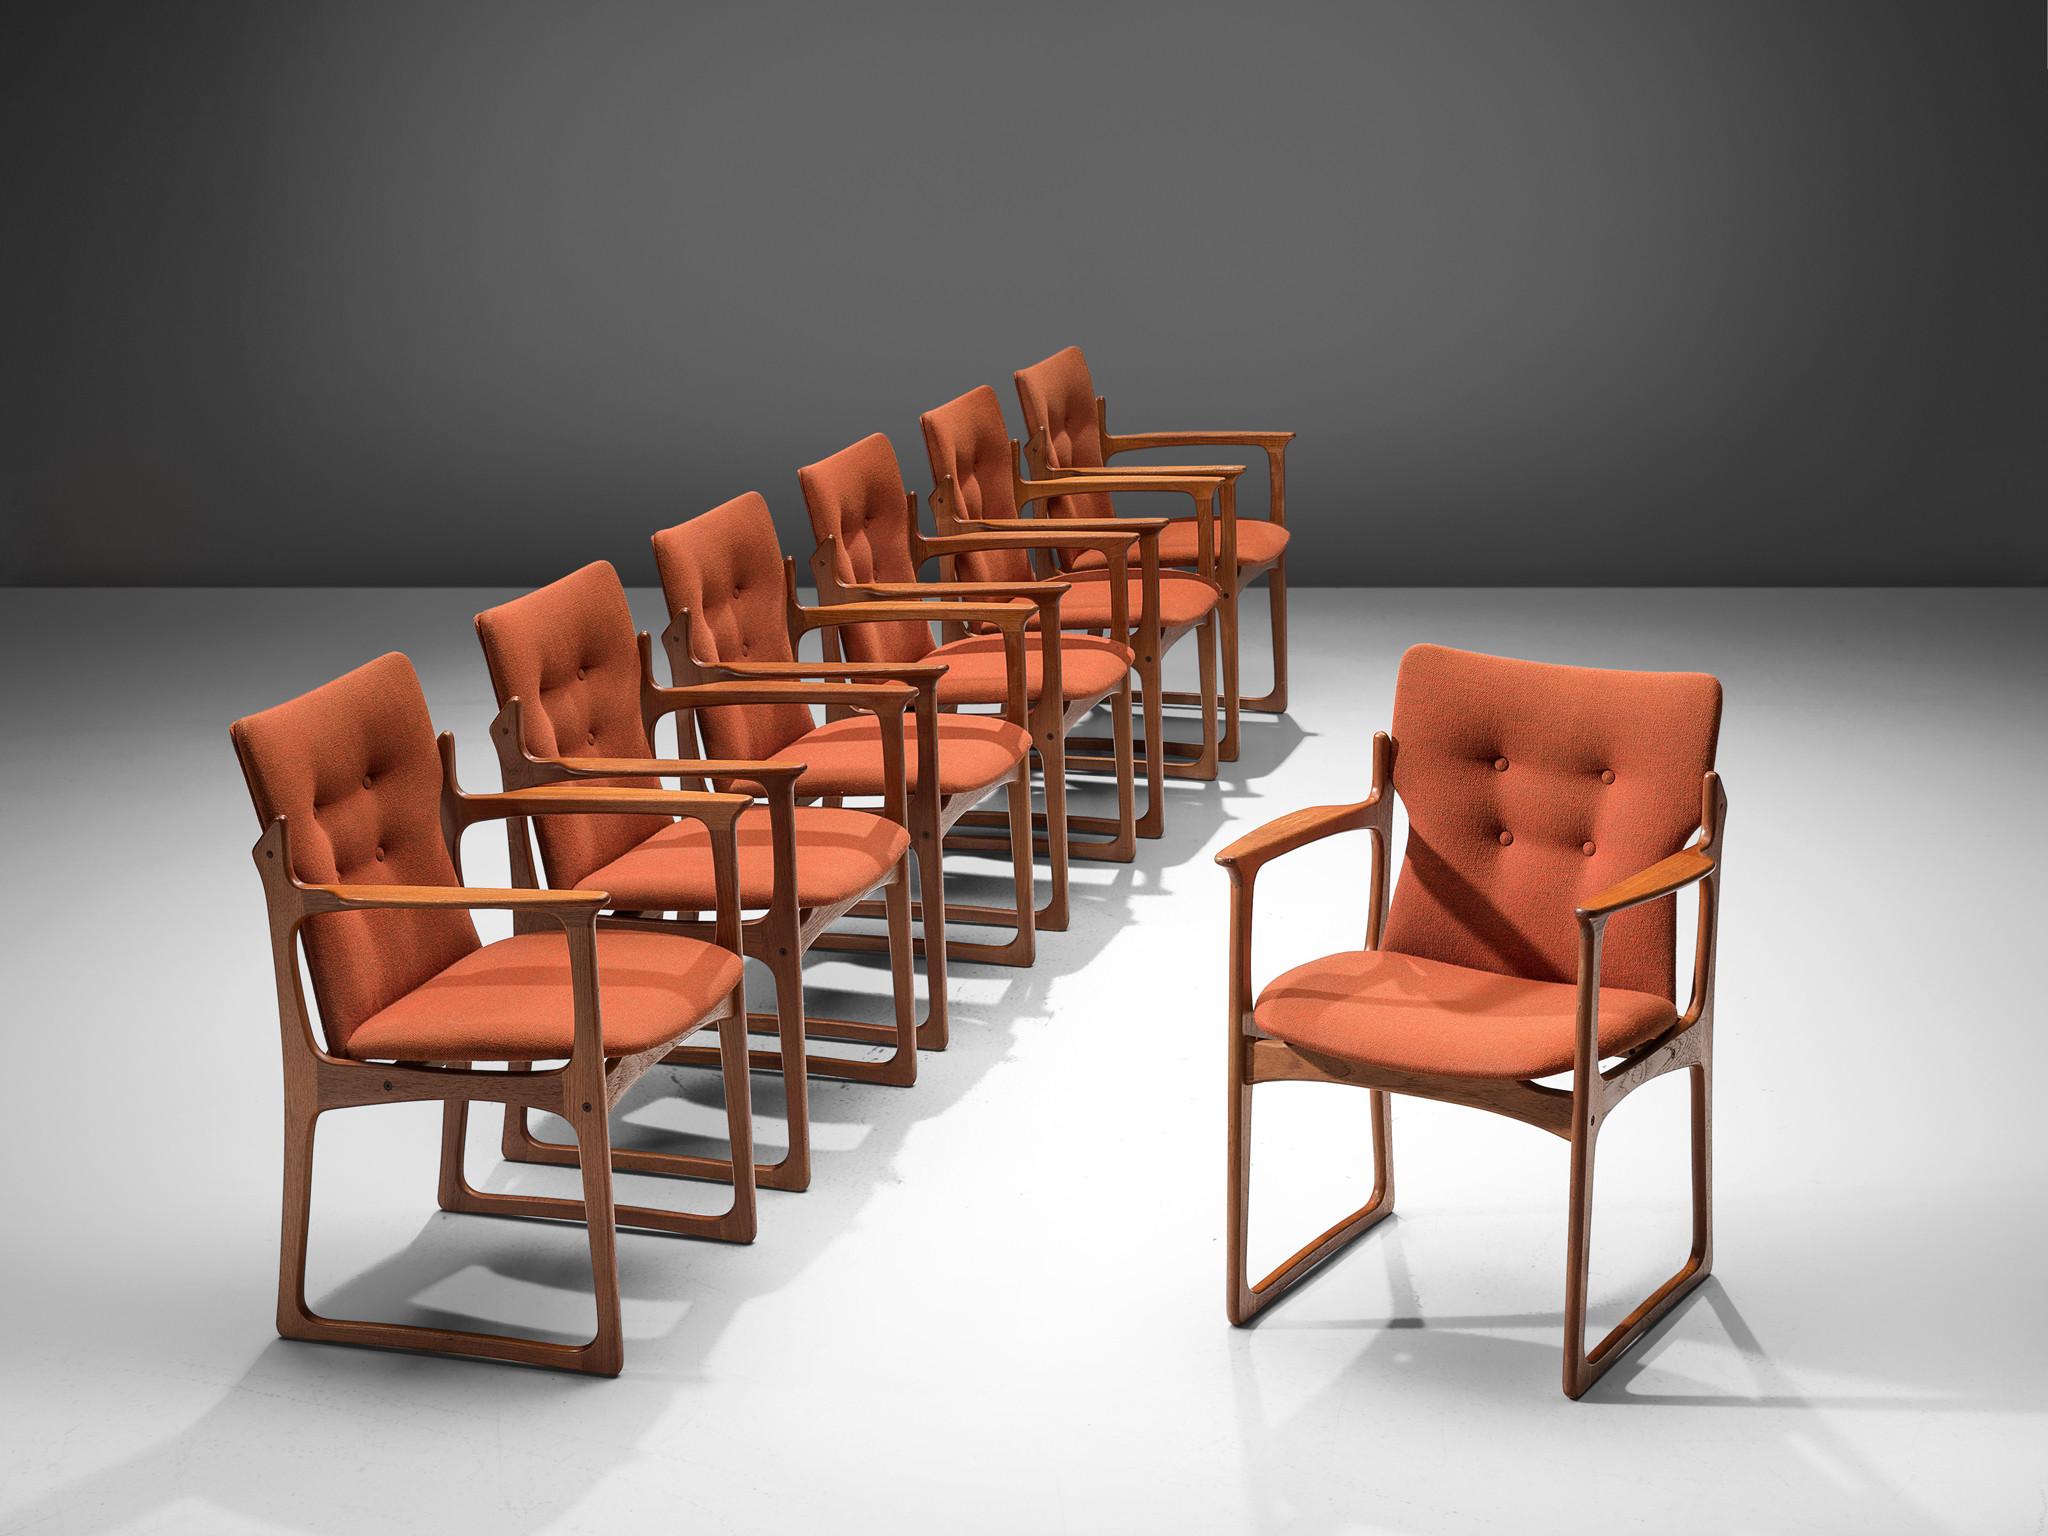 Vamdrup Stolefabrik, model 'VS 231', set of seven armchairs, teak and orange fabric, Denmark, 1960s. 

The armchairs with a solid teak frame, raise a handsome original orange upholstery seat. The frame shows subtle lines and beautiful curves of